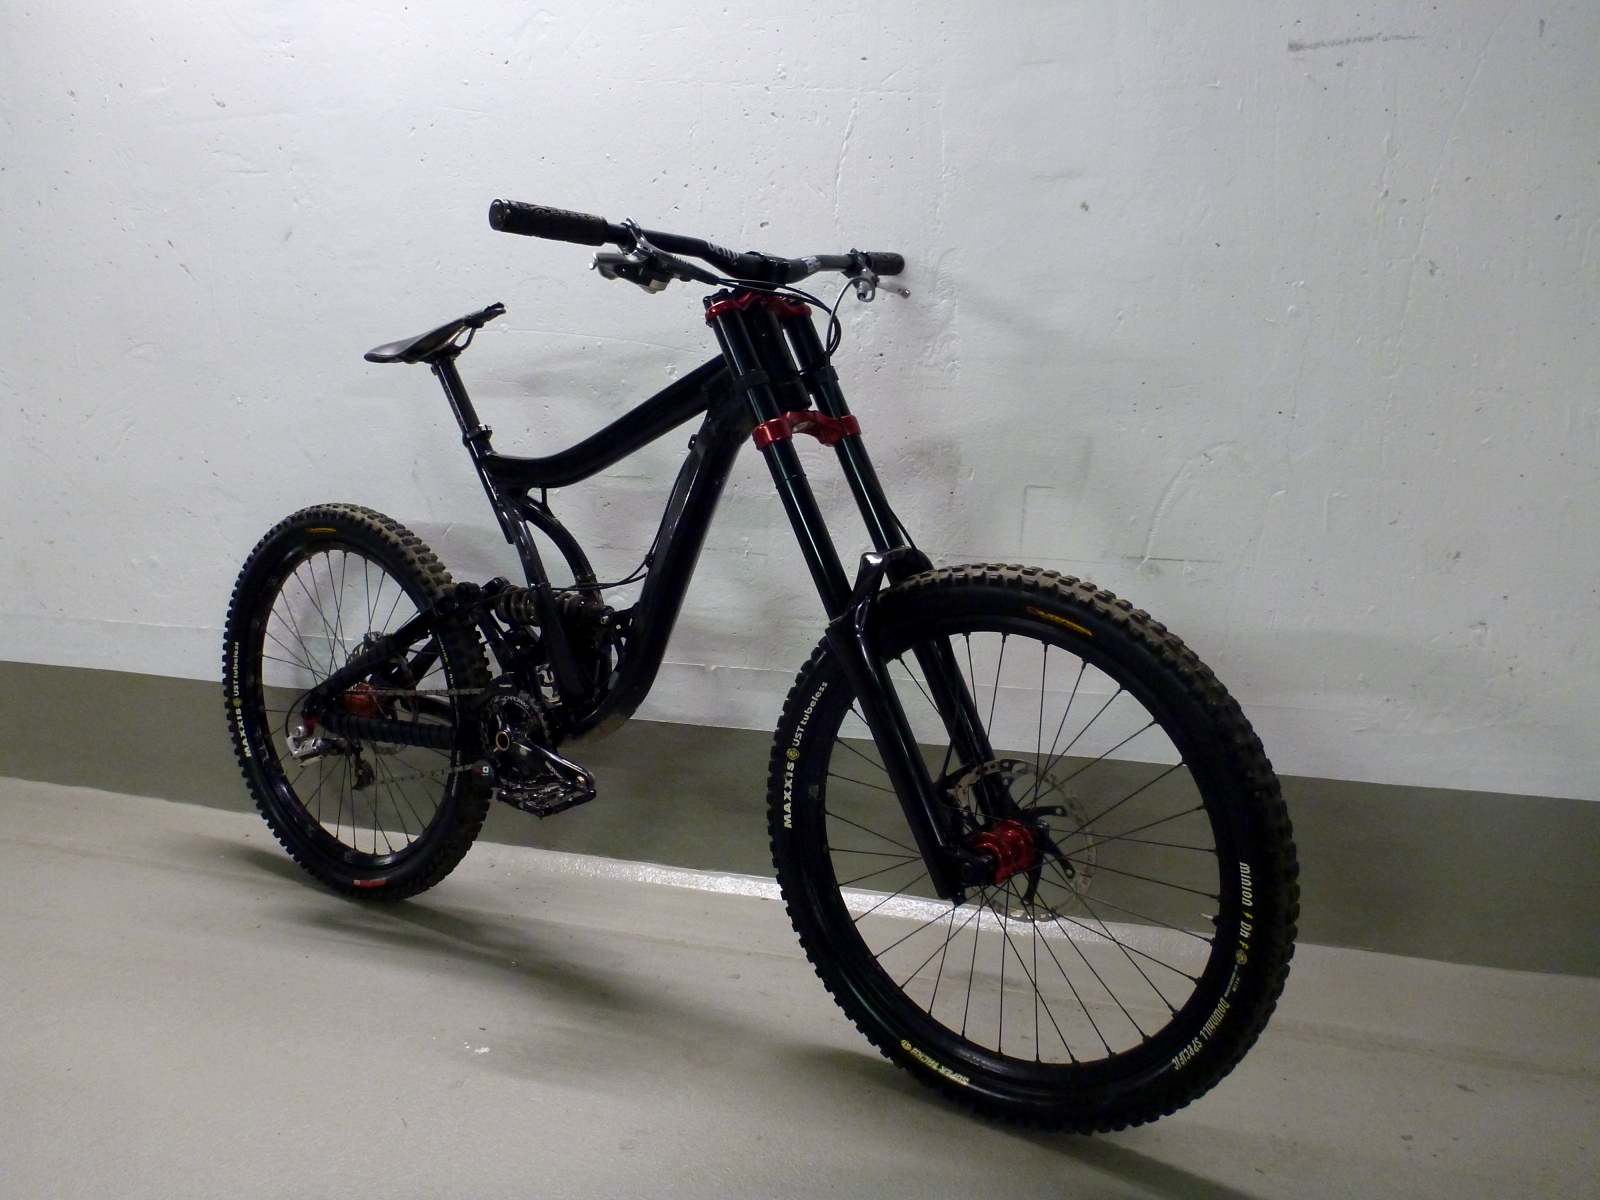 Norco Team DH 2010 - Large
888 RC3 Evo with YT Tues LTD Crowns
Vivid 5.1 with K9 Race Steel Spring

much more ...